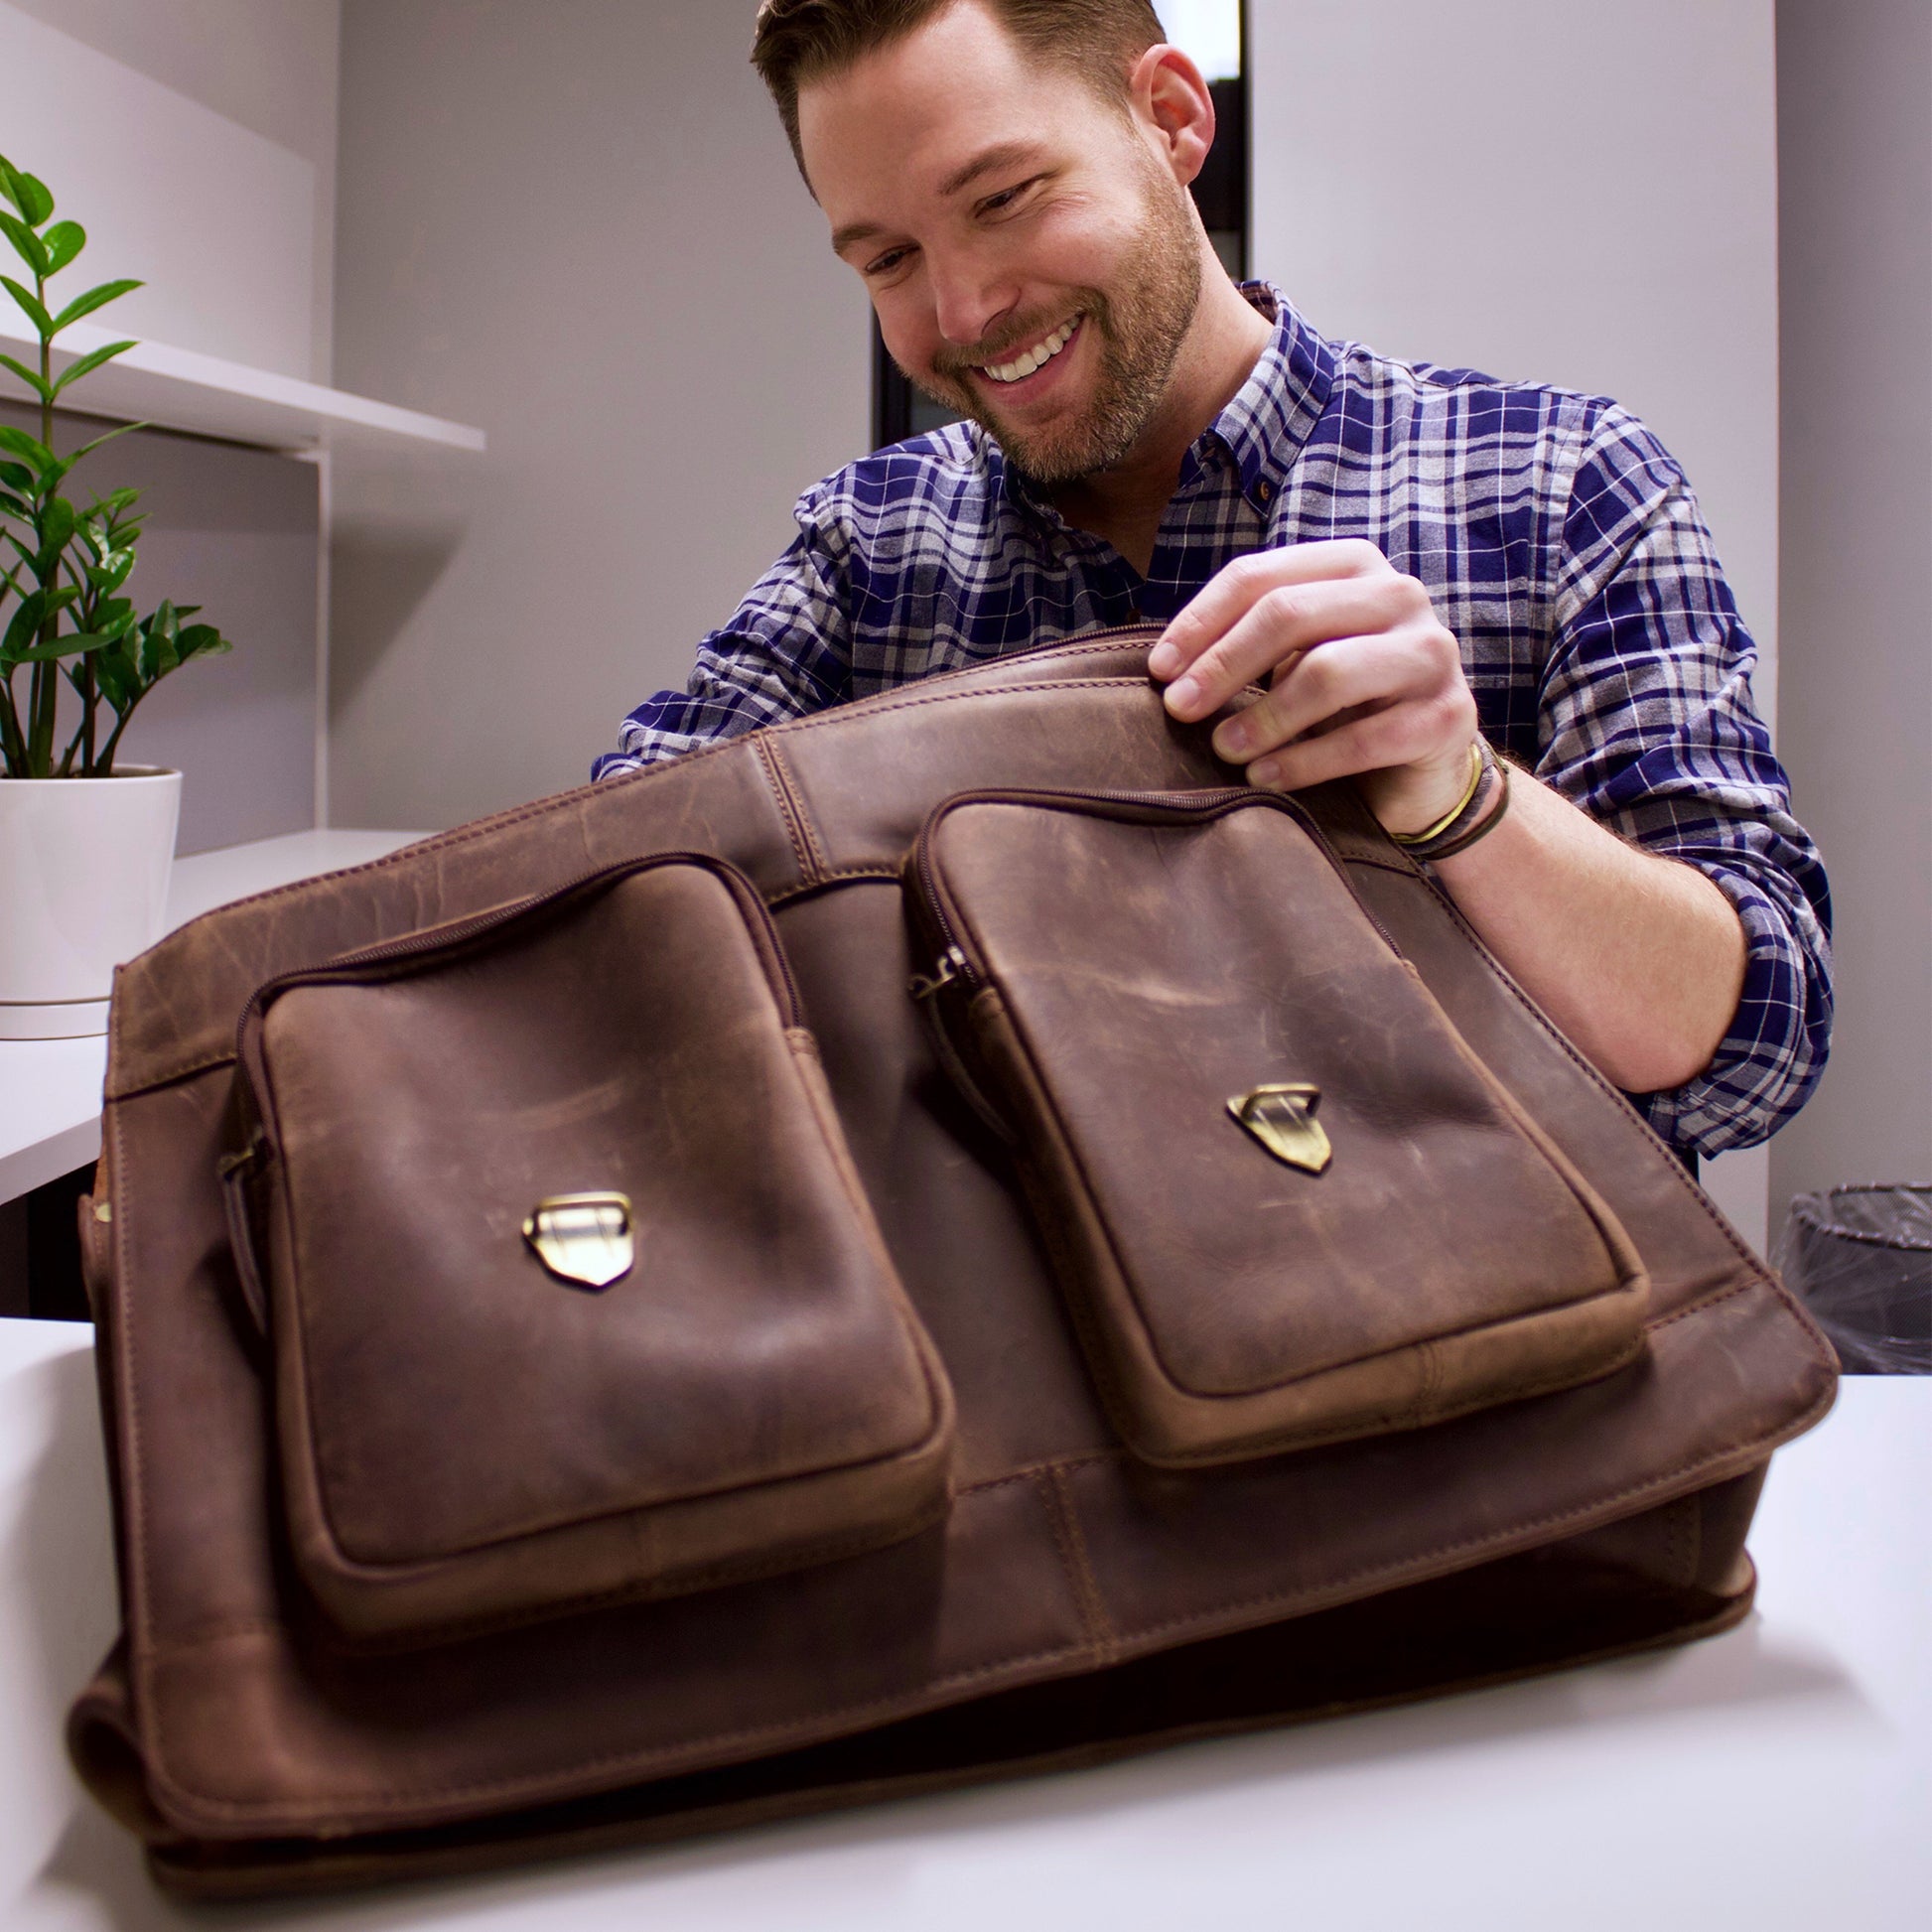 Men's Buffalo Leather Messenger Bag | Distressed Full Grain Laptop Bag The Real Leather Company